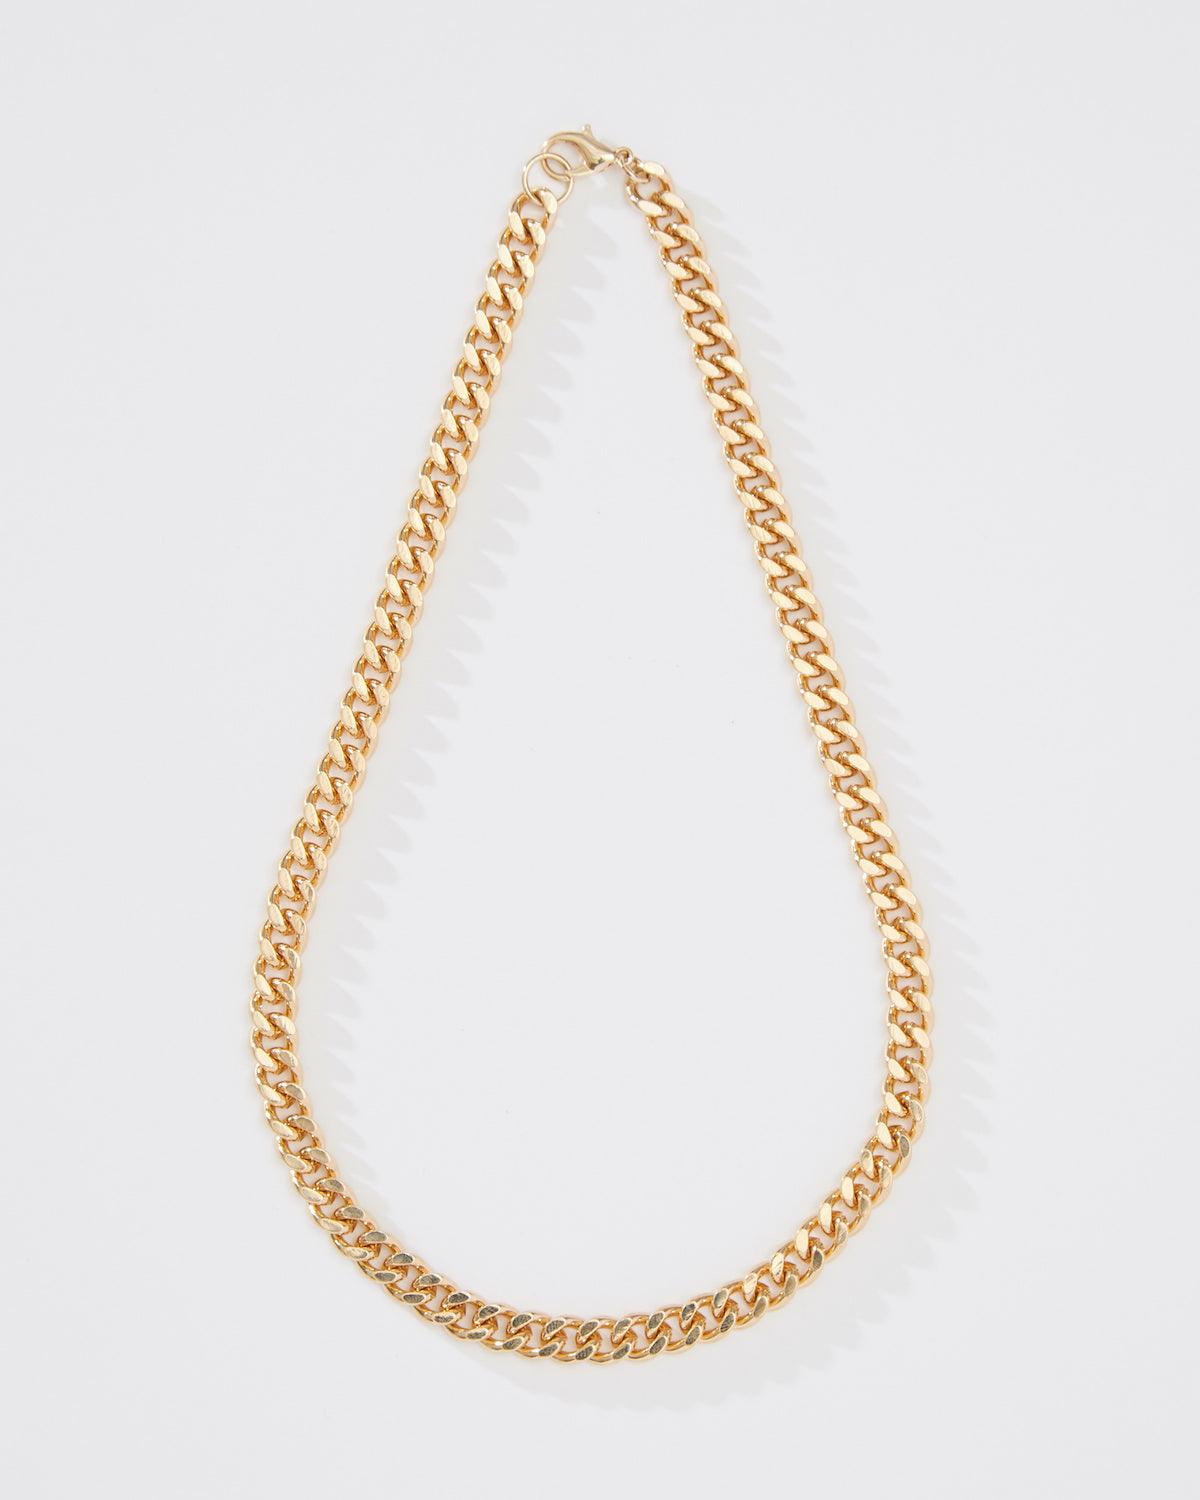 STERLING CHAIN